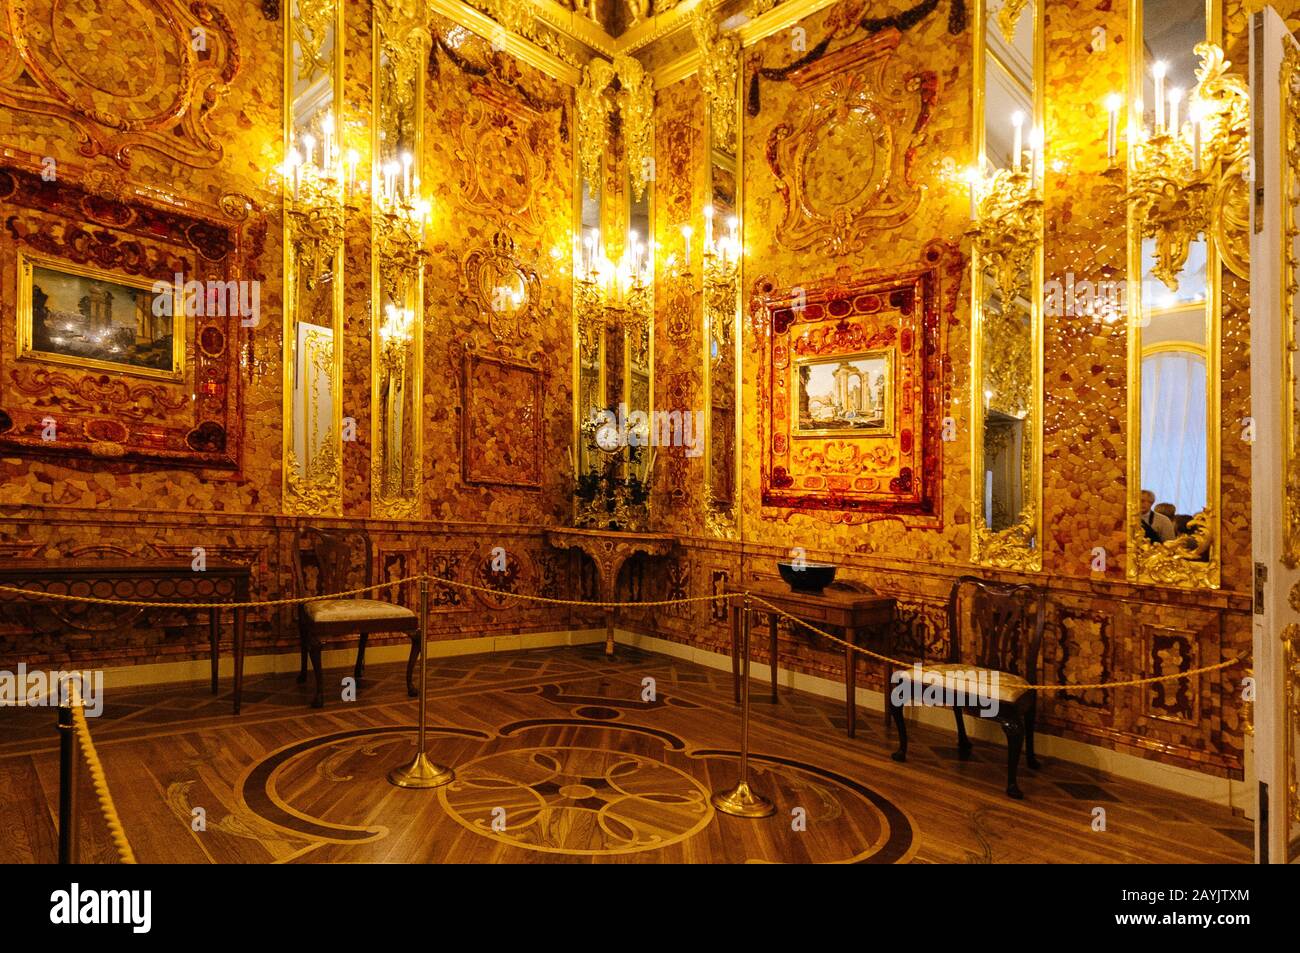 Catherine Palace, Interior of Amber room. St. Petersburg, Russia - Jan. 4 2014 Stock Photo